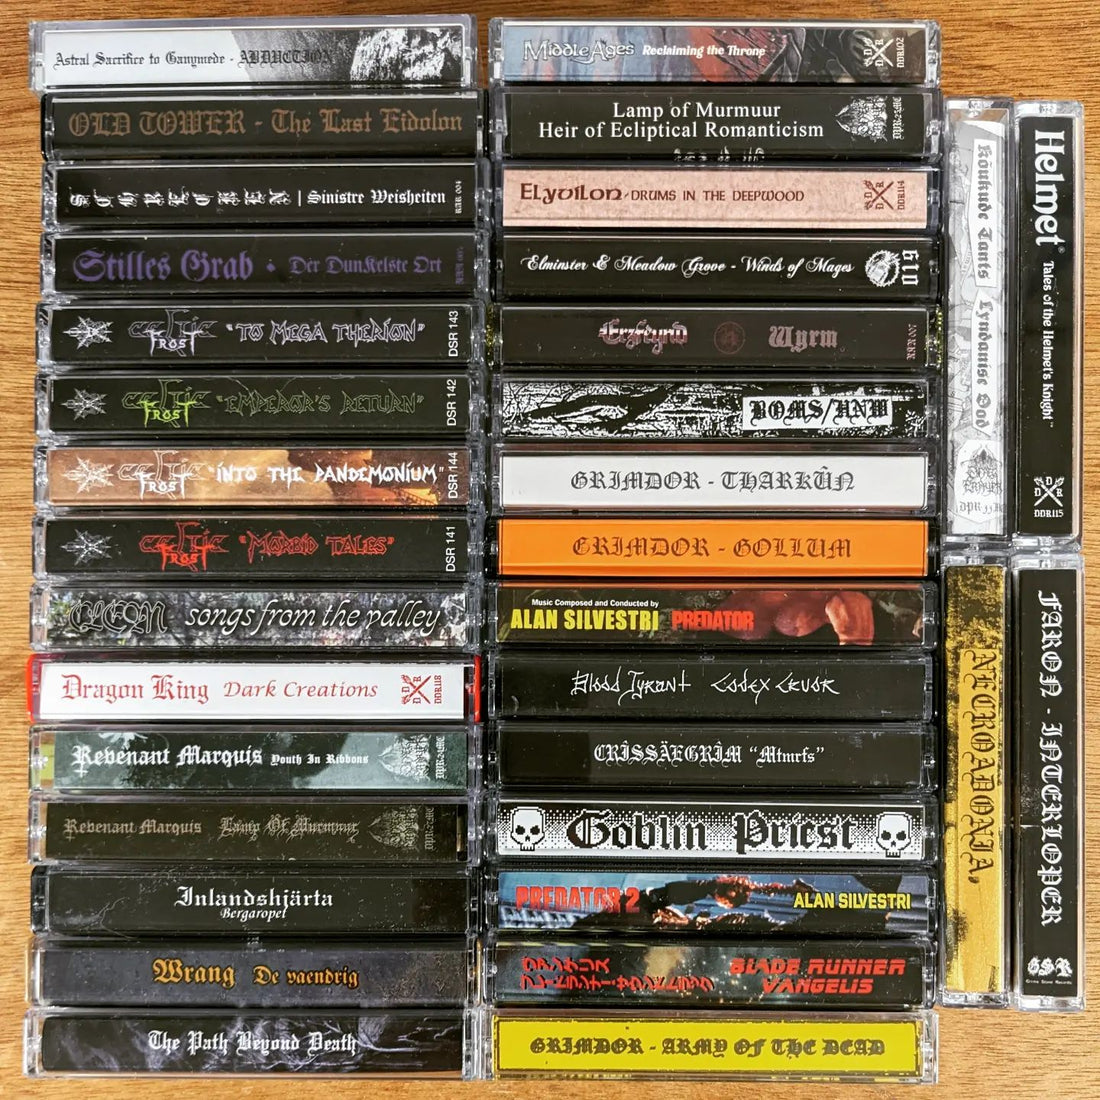 Check out this absolute stack!! Y'all asked for more tapes and we have delivered, tons of imports!